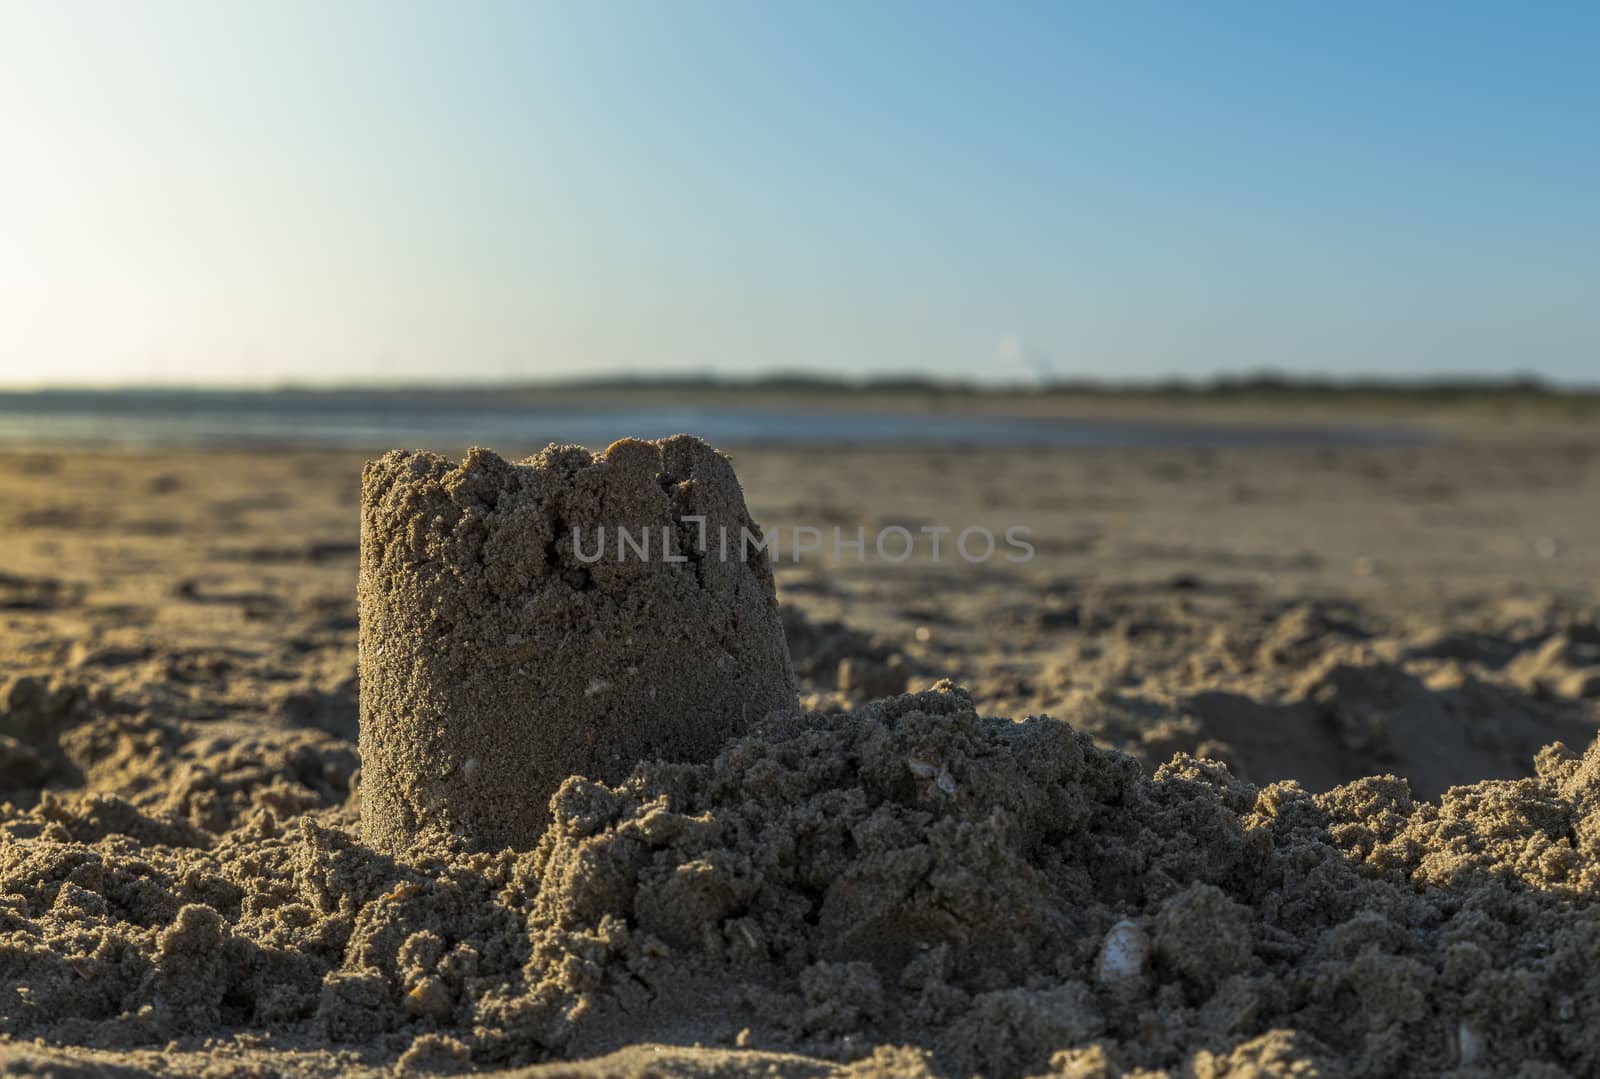 sandcastel at the beach by compuinfoto